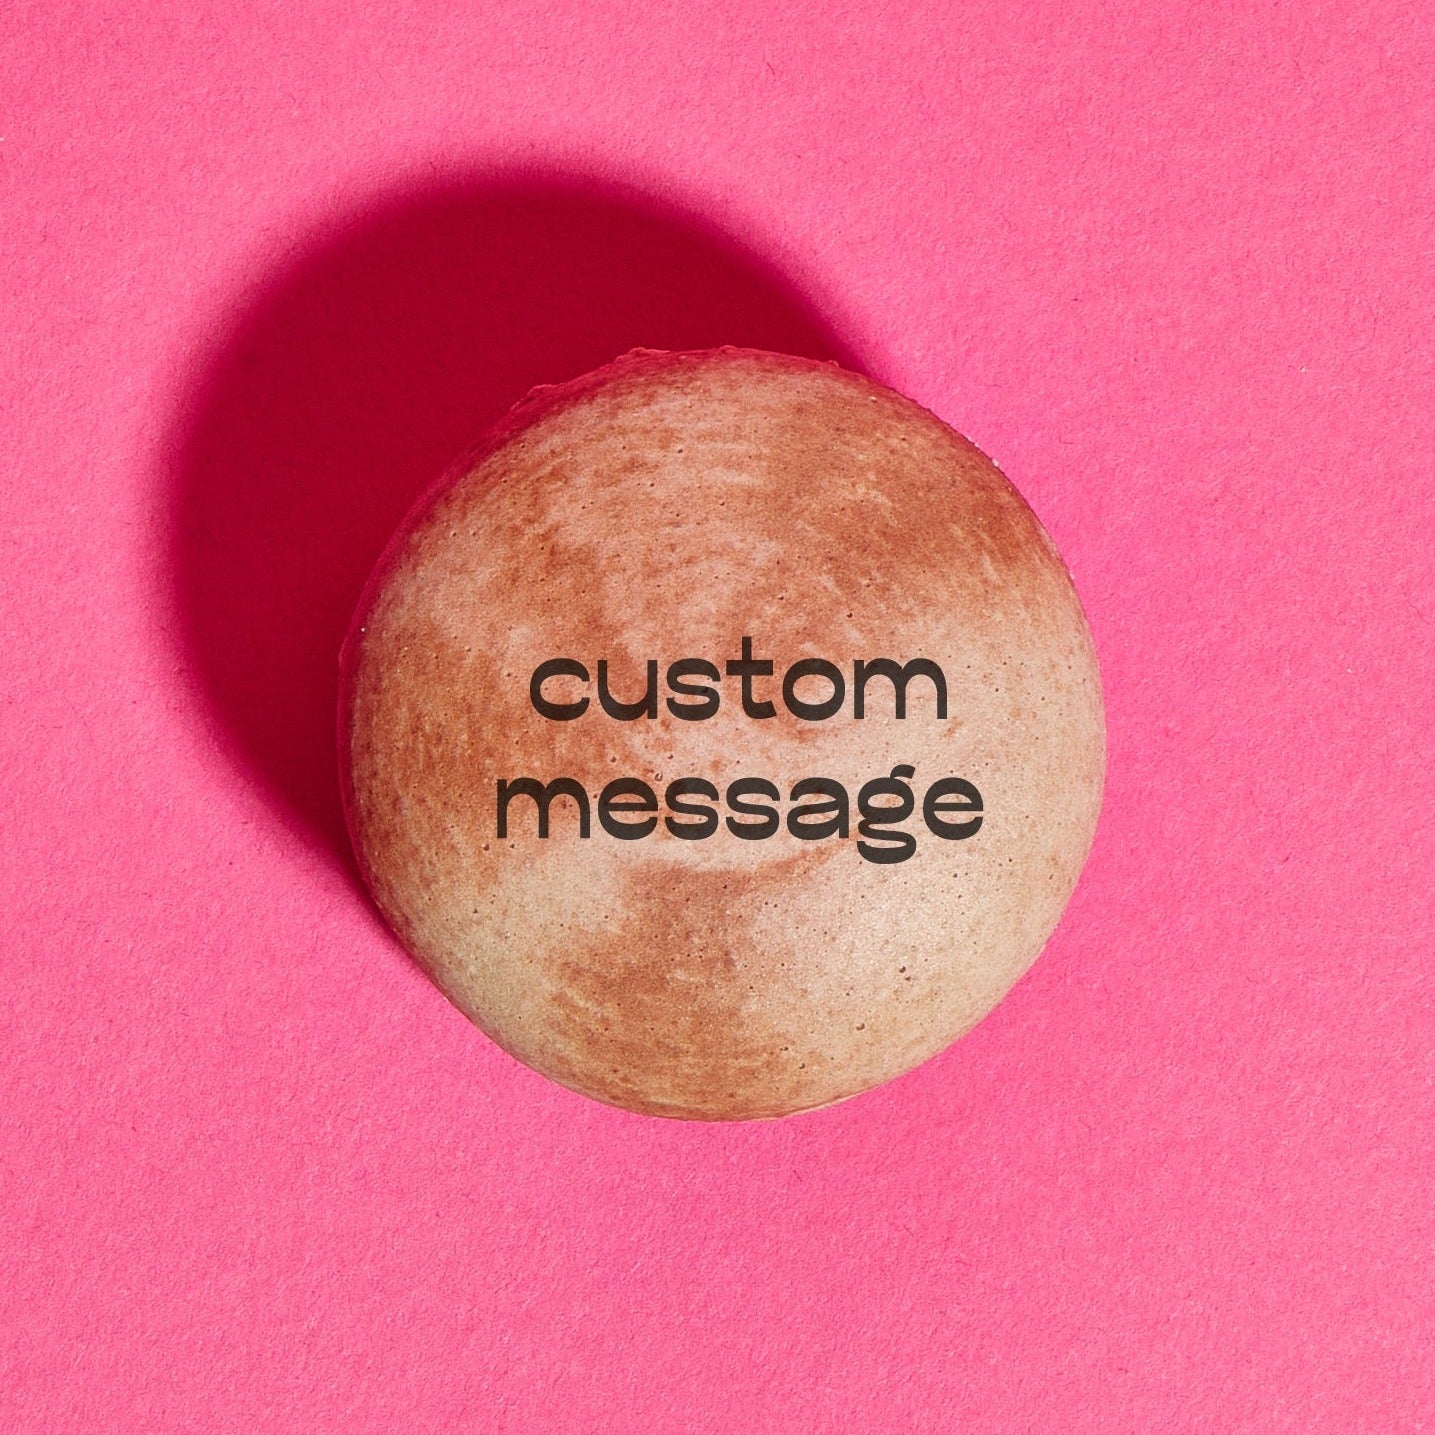 Overhead shot of a brown tie-dye macaron with the words "custom message" printed on the shell in black ink. The macaron is placed on a hot pink backdrop.